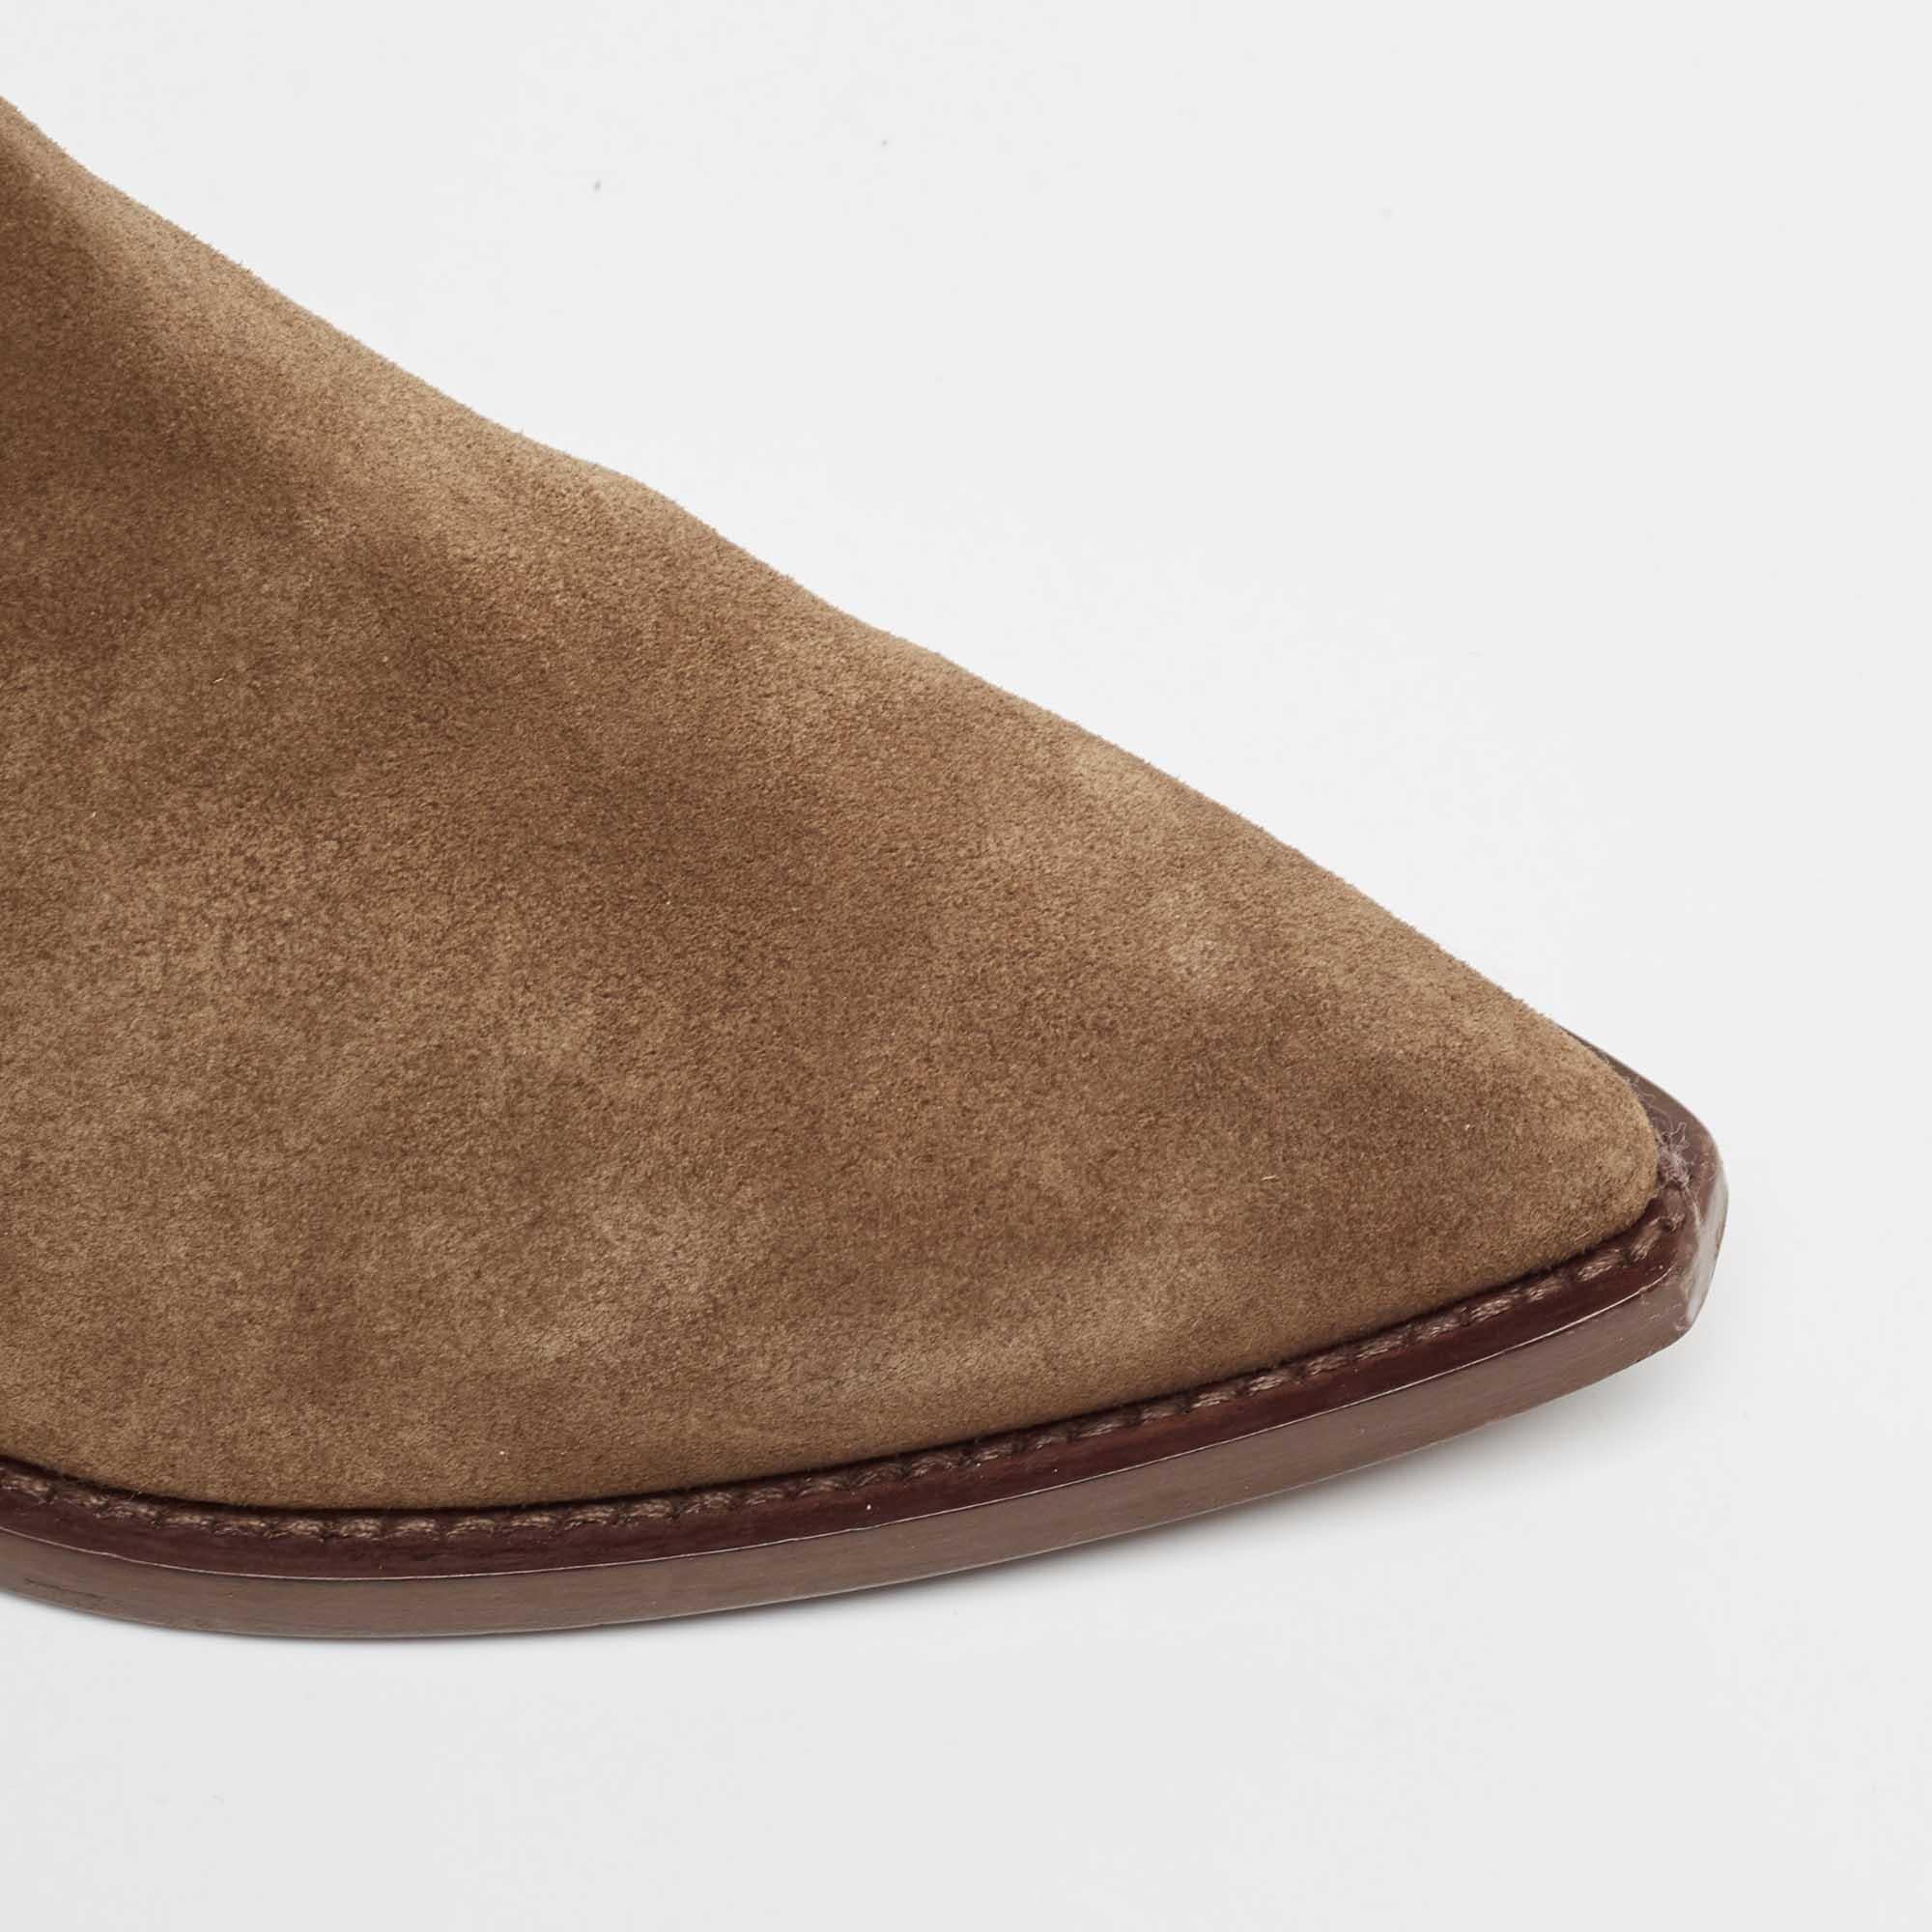 Saint Laurent Brown Suede Theo Chelsea Boots Size 40 2